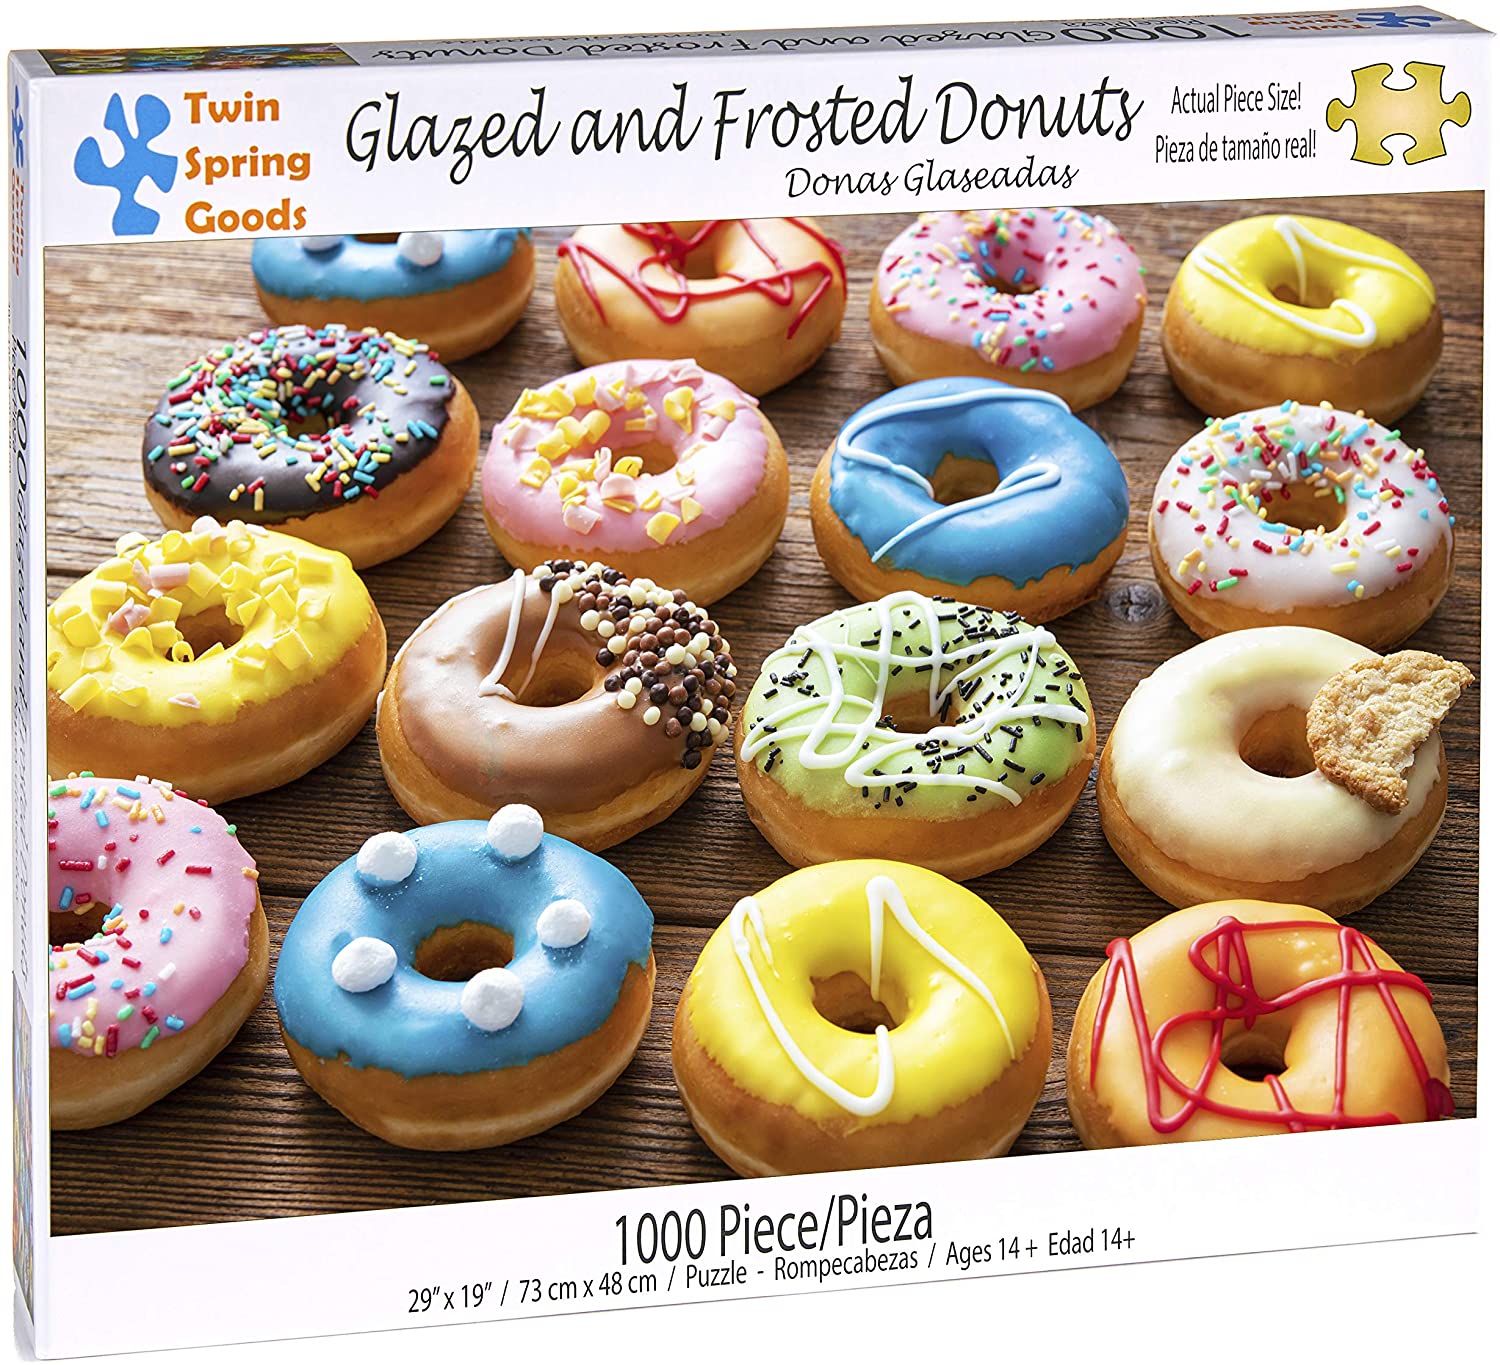 Glazed and Frosted Donuts (1000 pc puzzle)